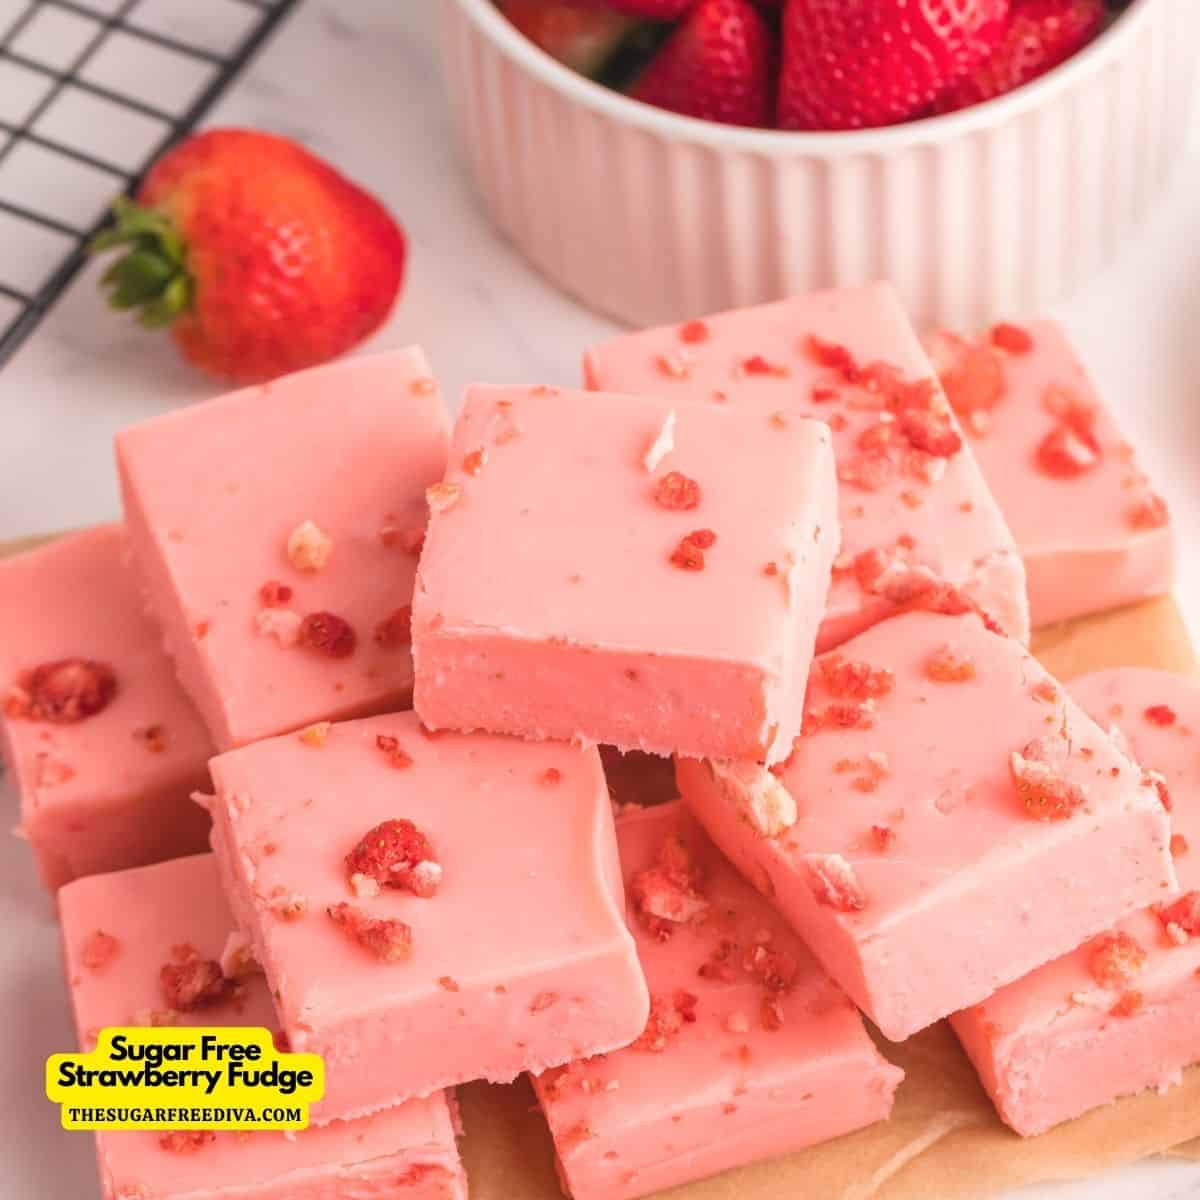 "Sugar Free Strawberry Fudge Recipe, a simple and delicious dessert or snack recipe made with dried strawberries and no added sugar.